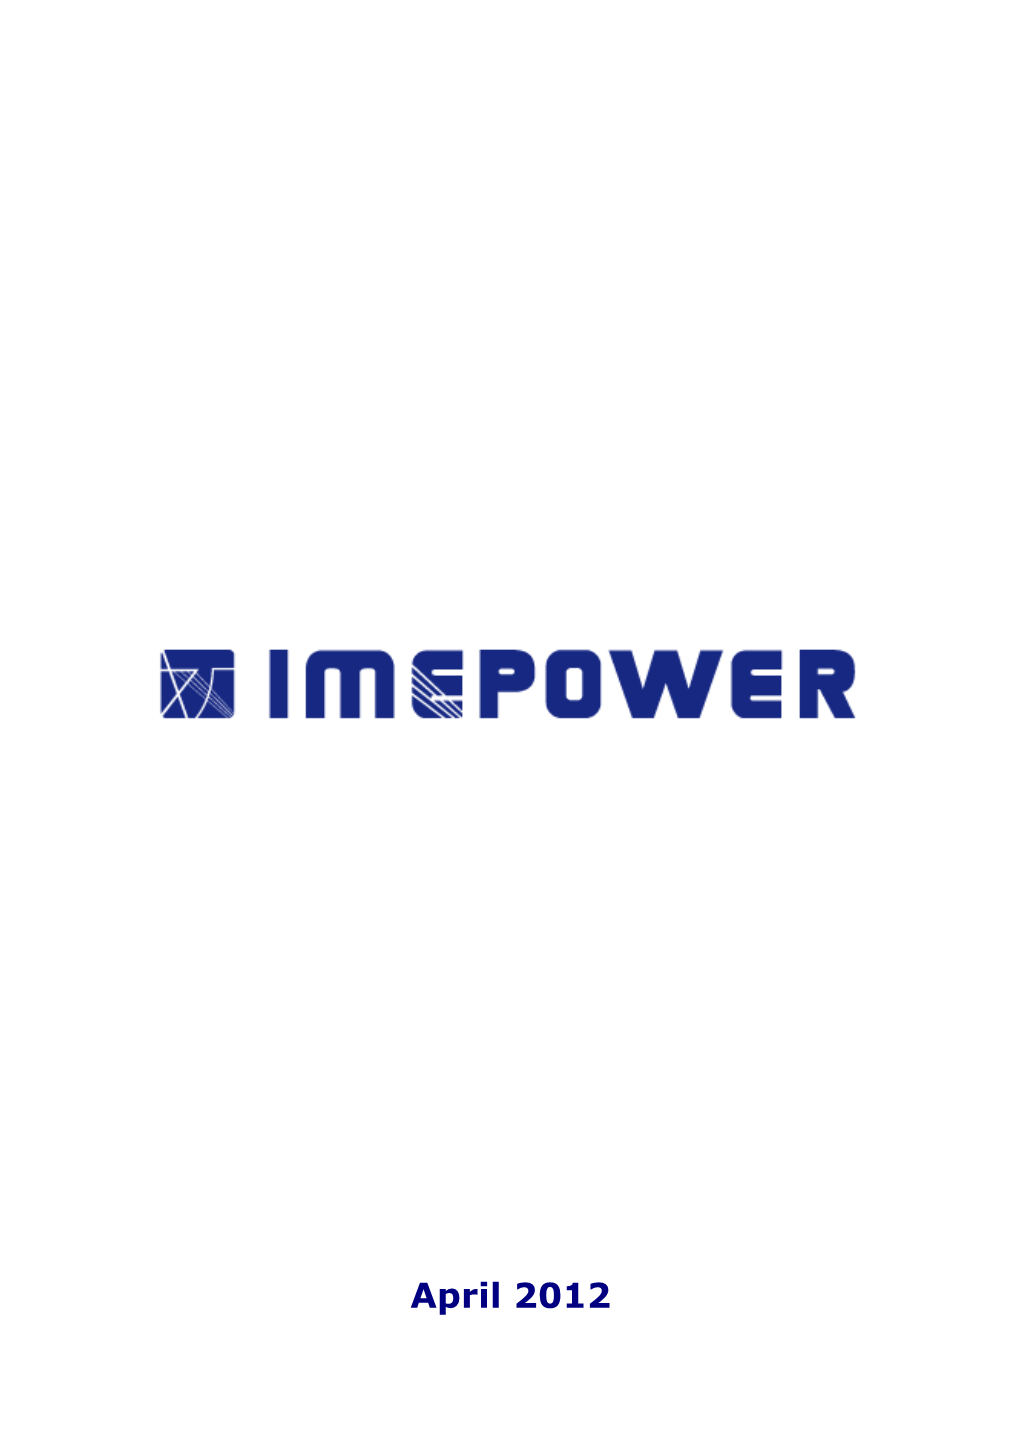 IMEPOWER Investment Group Was Established by INEKO-Management and Energy Consulting Group